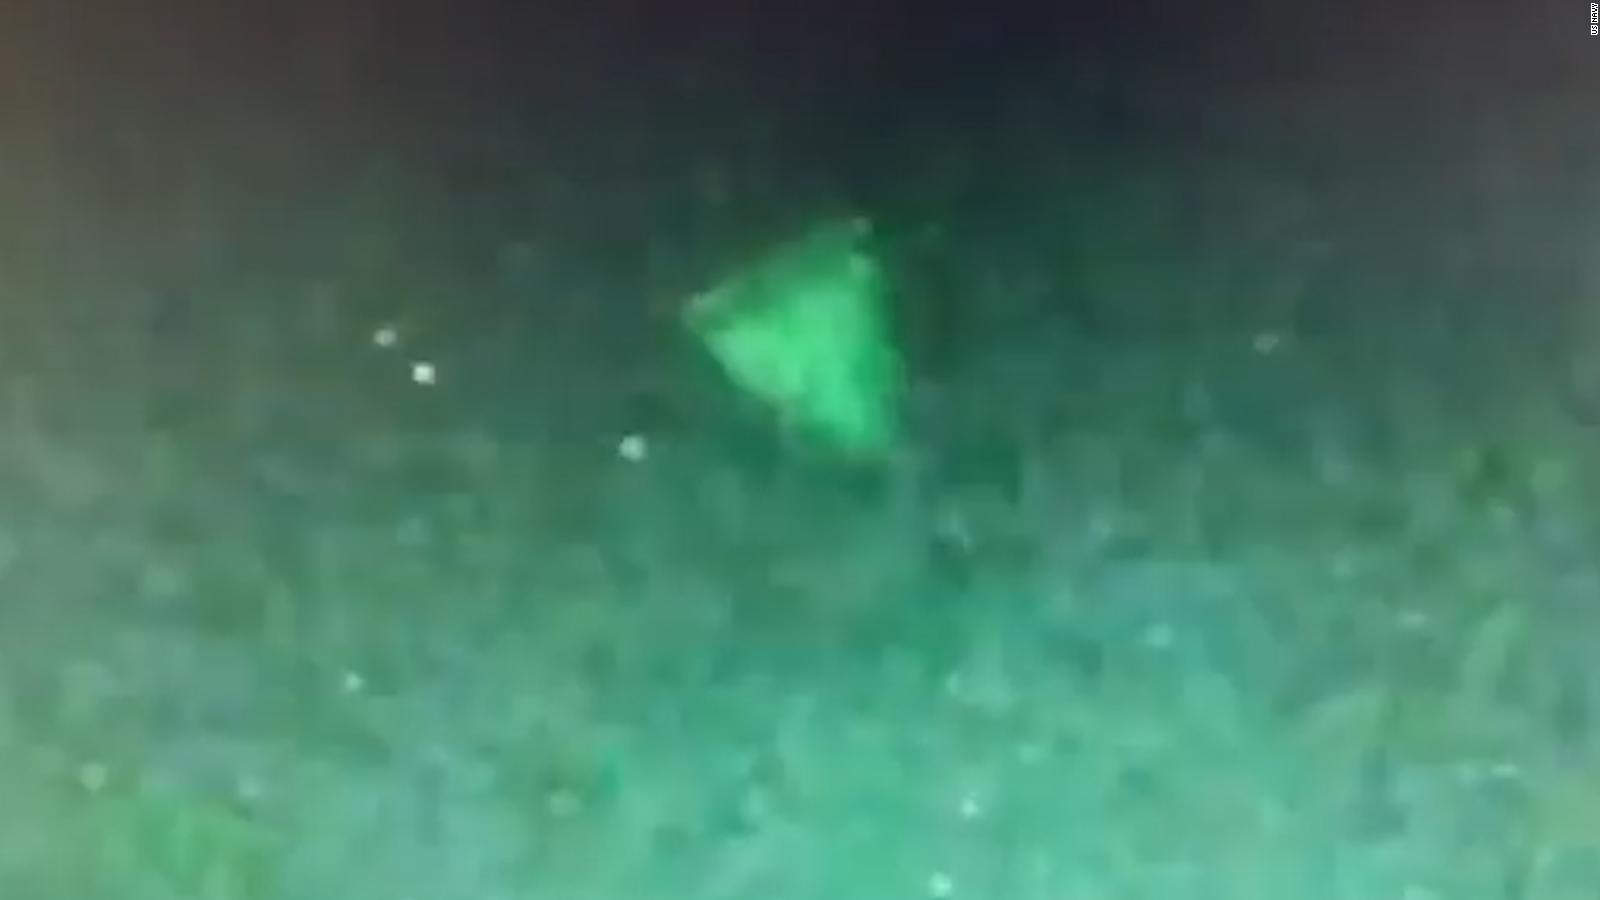 Pentagon confirms this UFO video is real